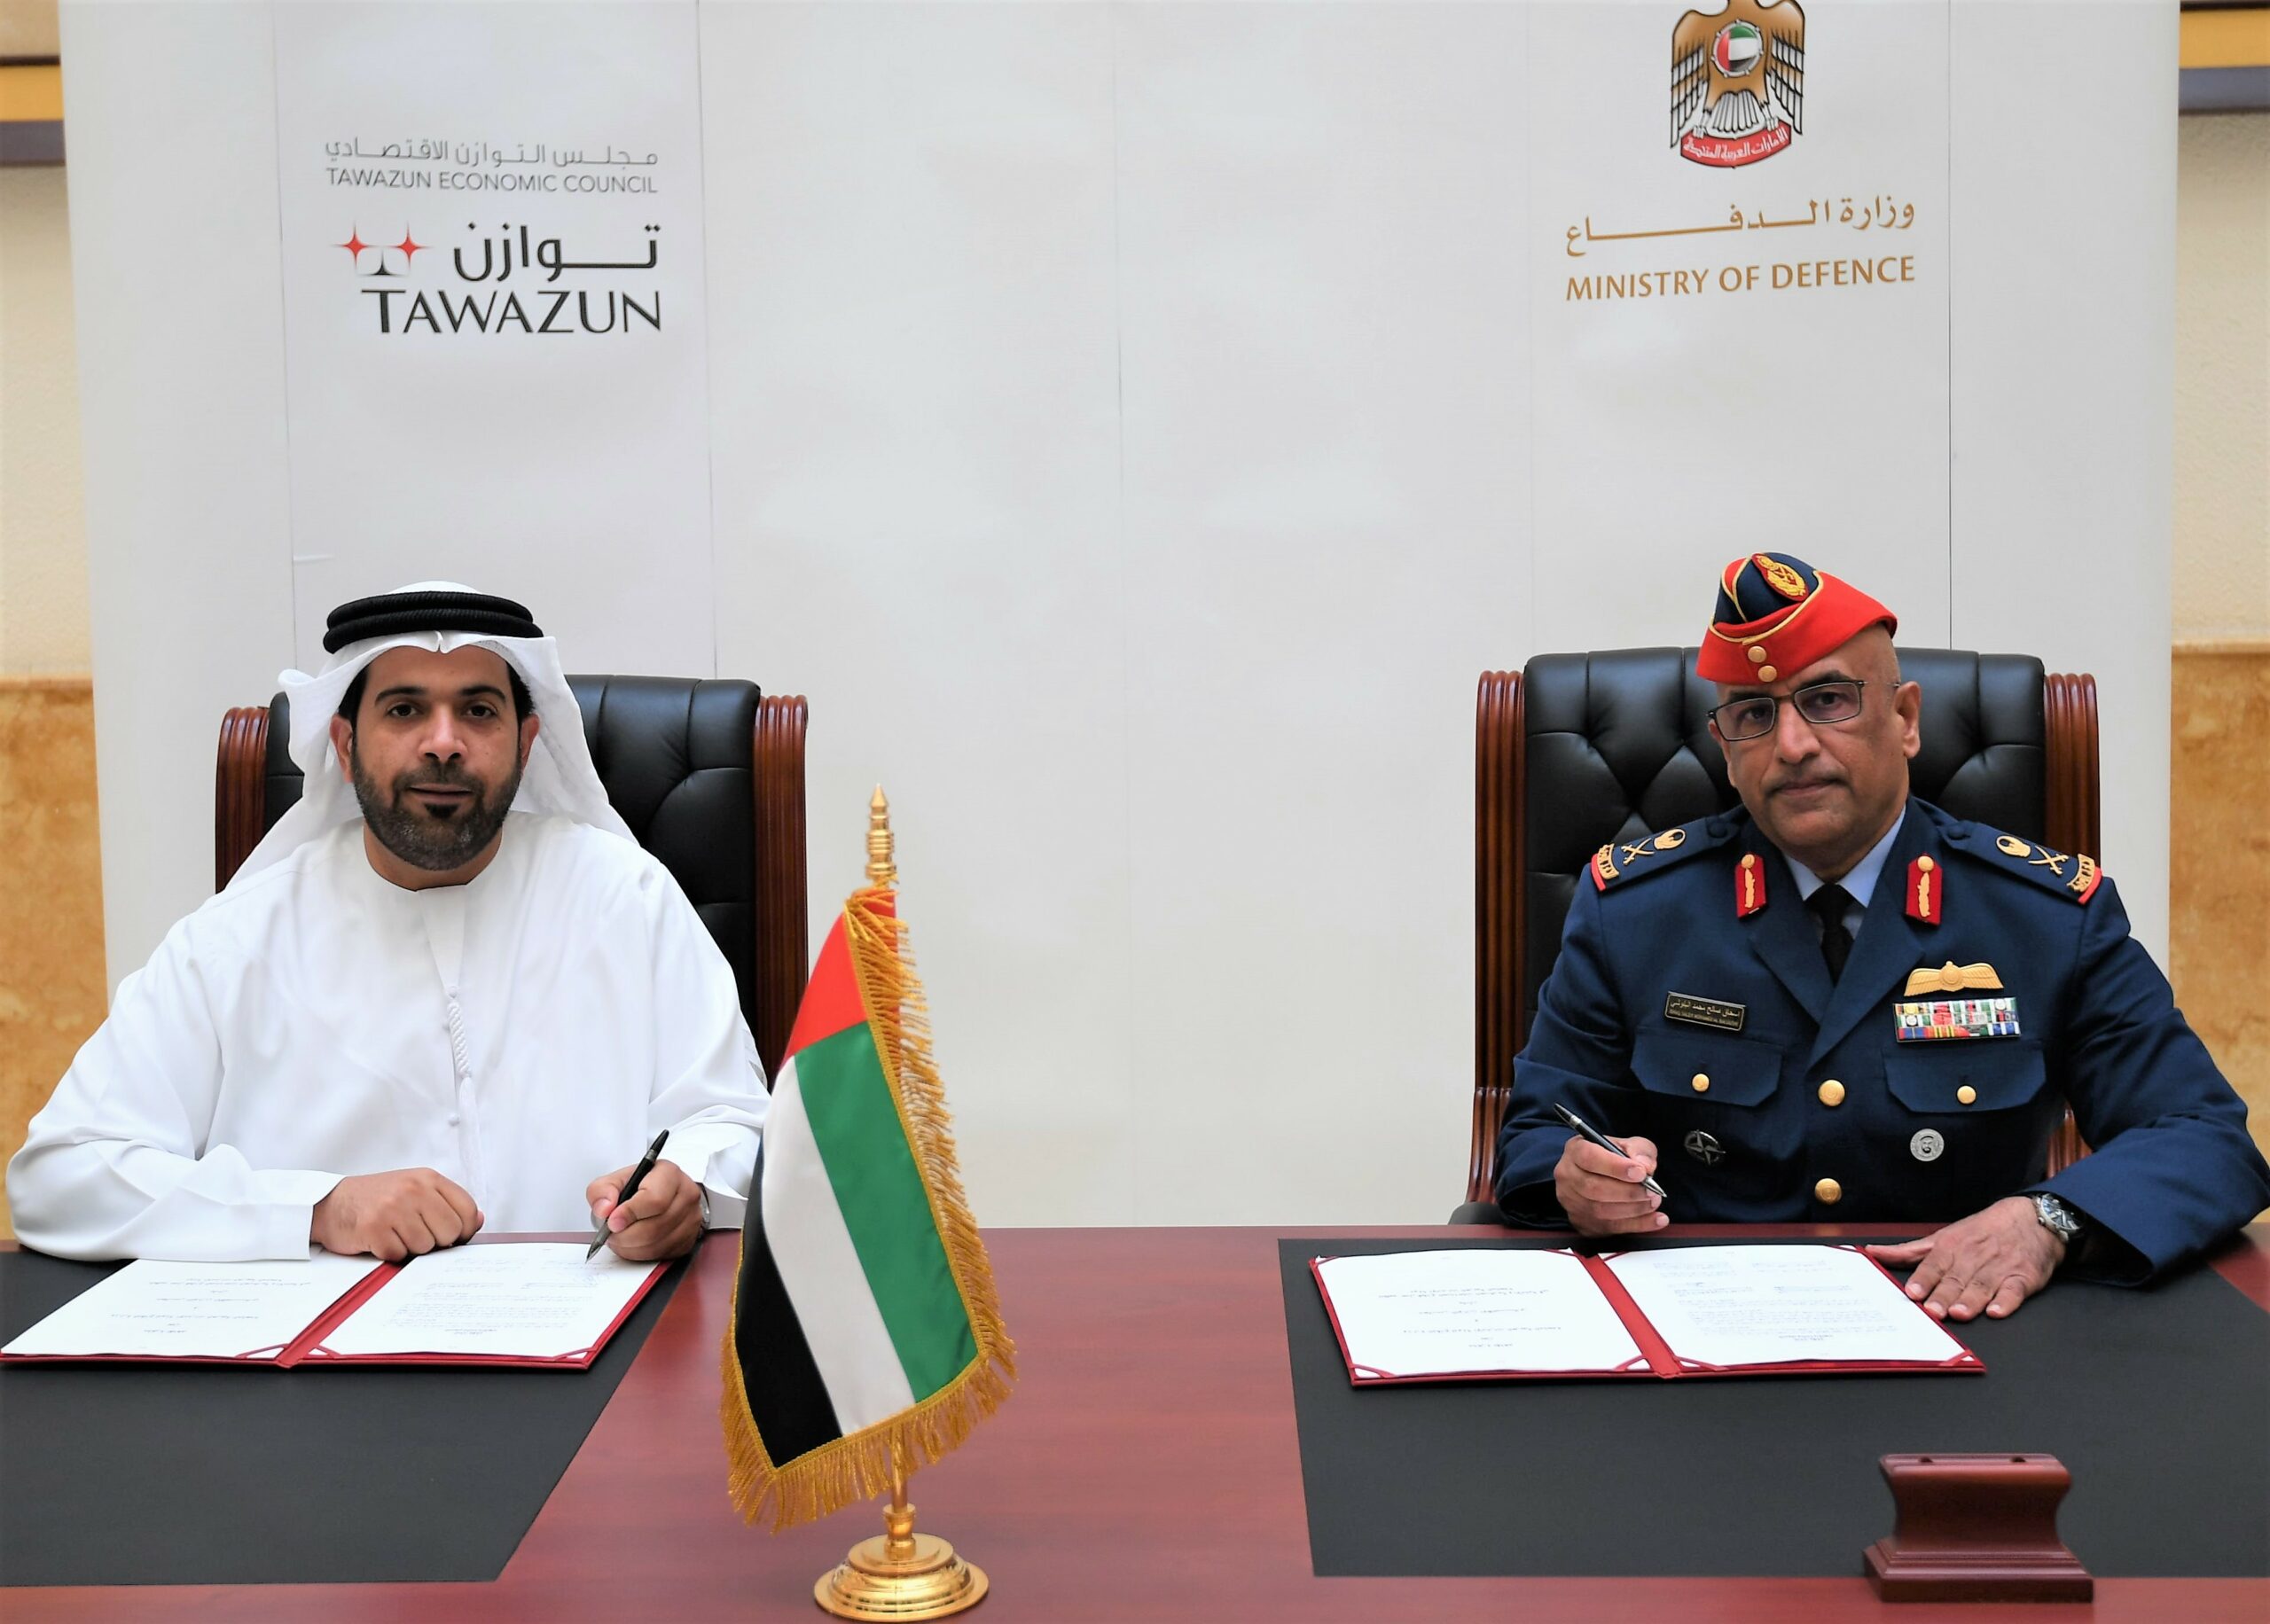 Ministry of Defense launches Trade Control Office at Tawazun Industrial Park